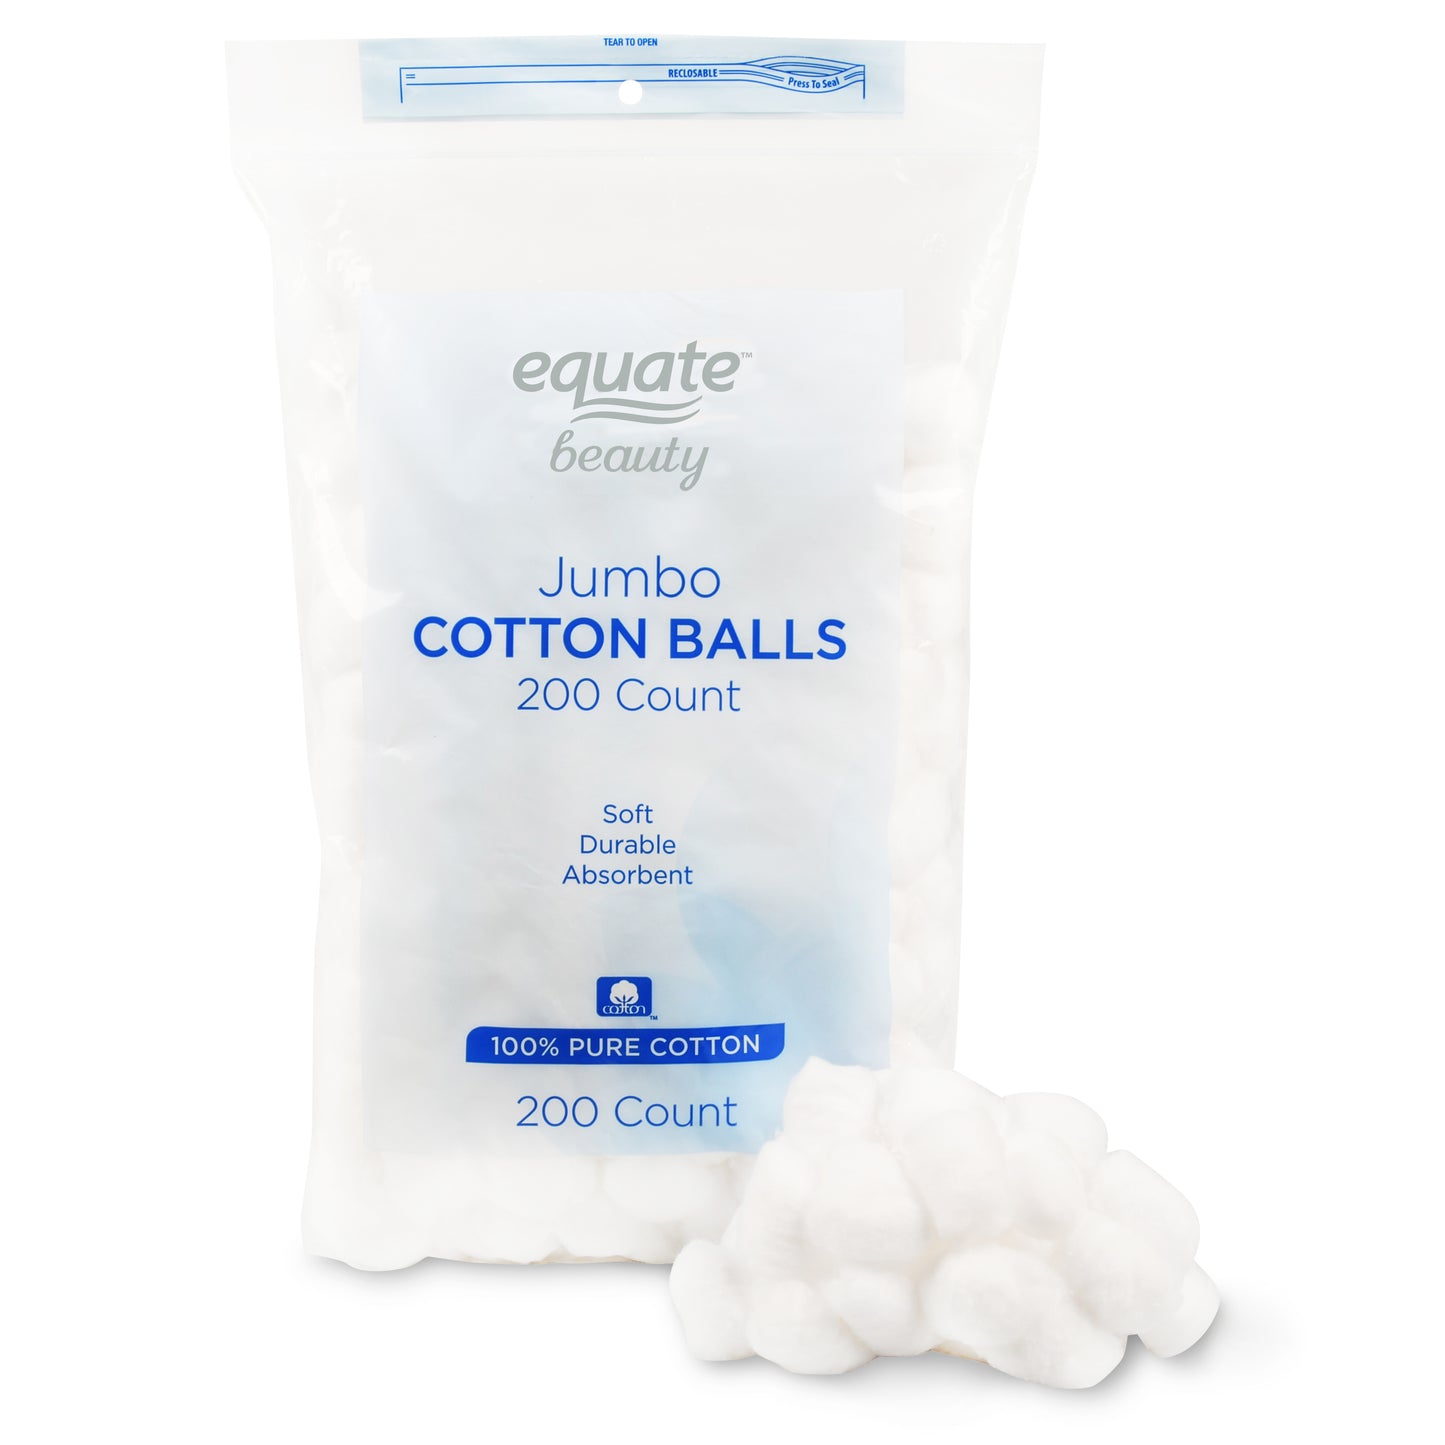 Equate Beauty Jumbo Cotton Balls, 200 Ct (Pack of 2)